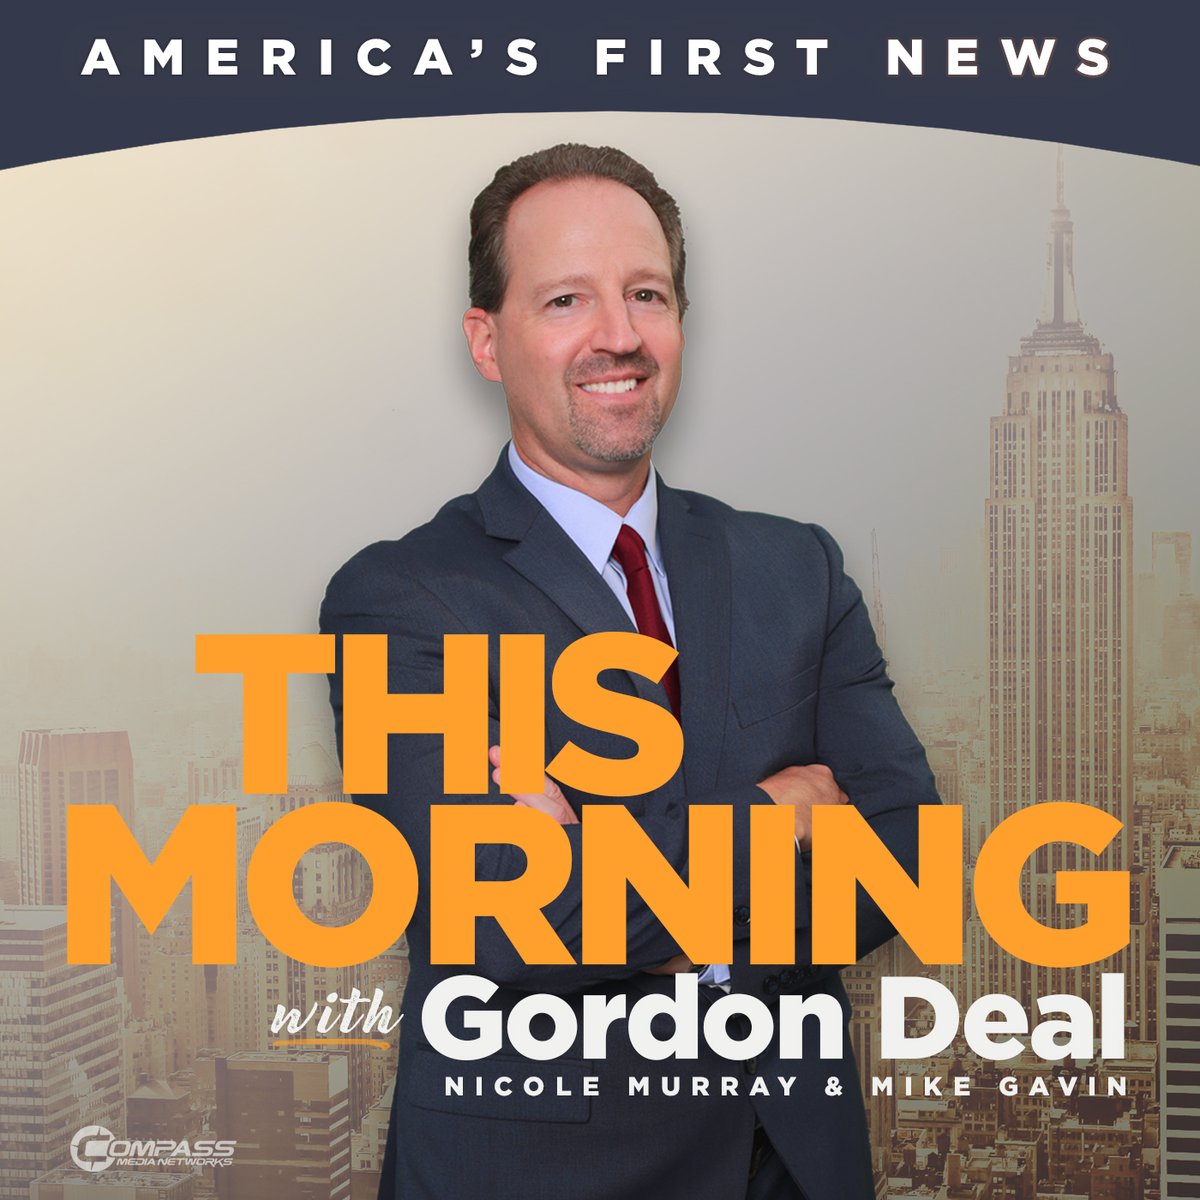 .@GordonDeal interviews the @dcexaminer's James Antle about debates that are scheduled between Biden and Trump in the upcoming future. thismorningwithgordondeal.com/n/yunevm